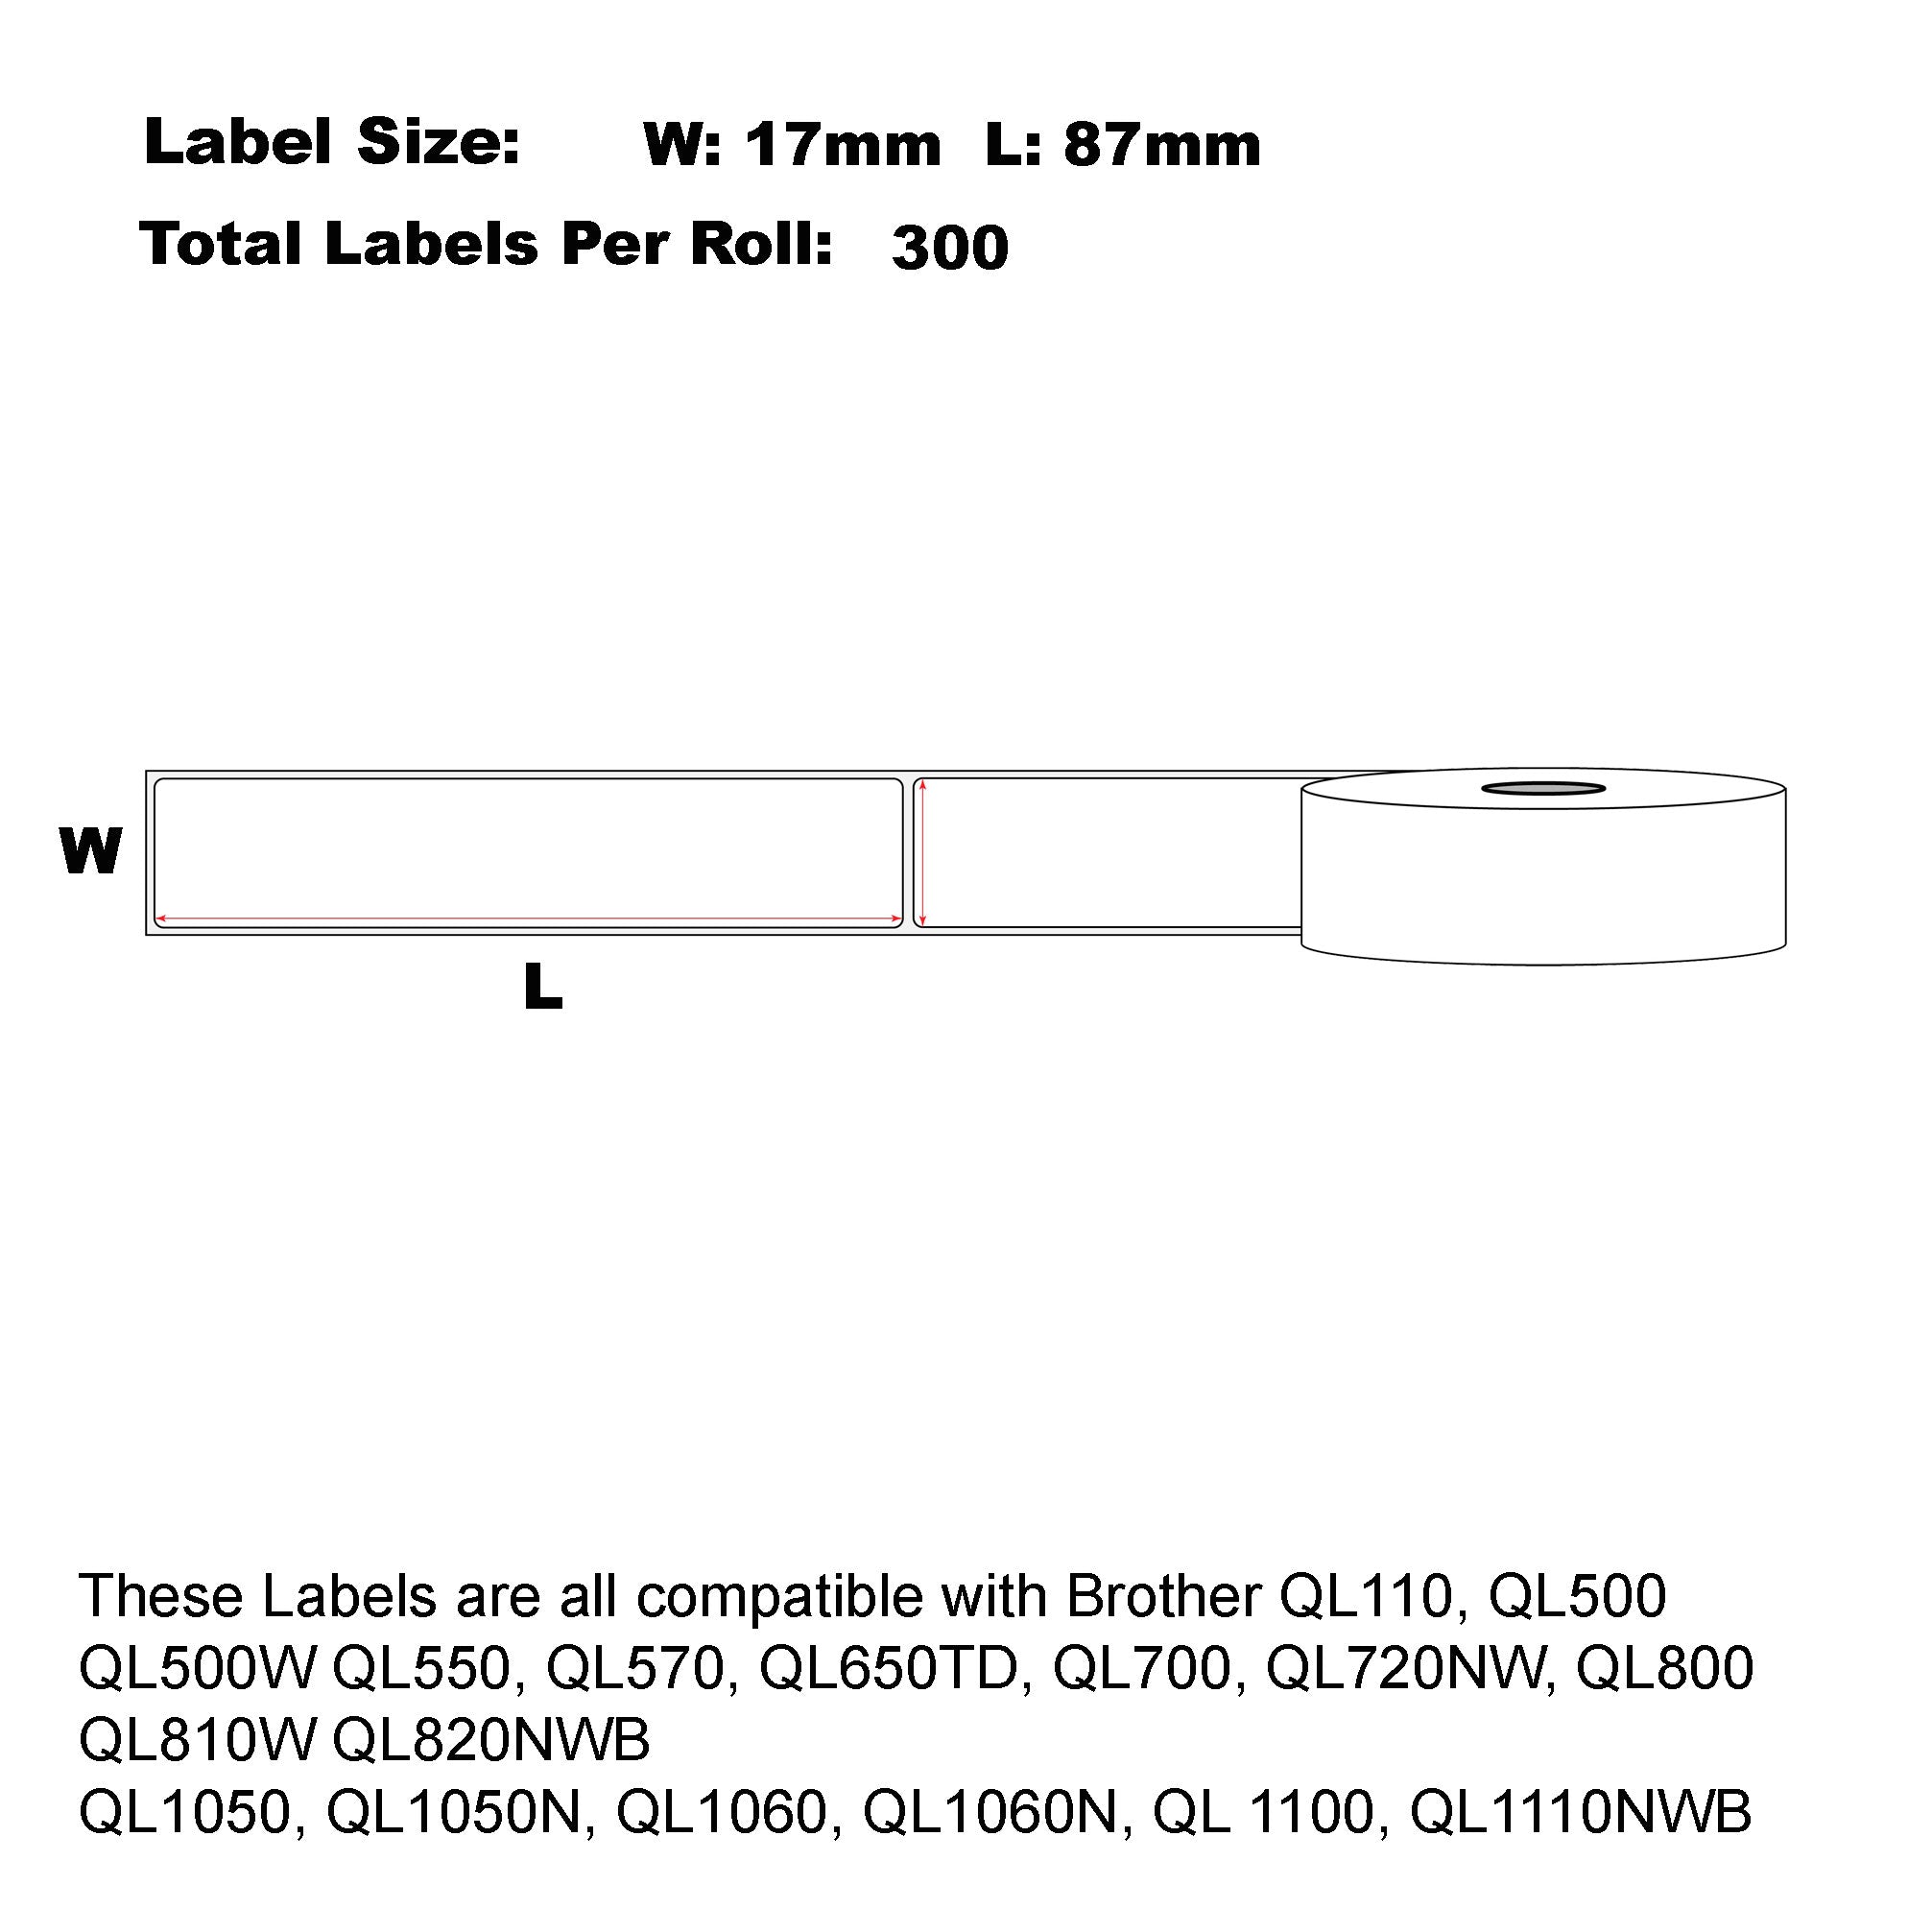 6x Compatible Brother DK-11203 File Folder White Refill labels 17mm x 87mm 300 Labels/Roll